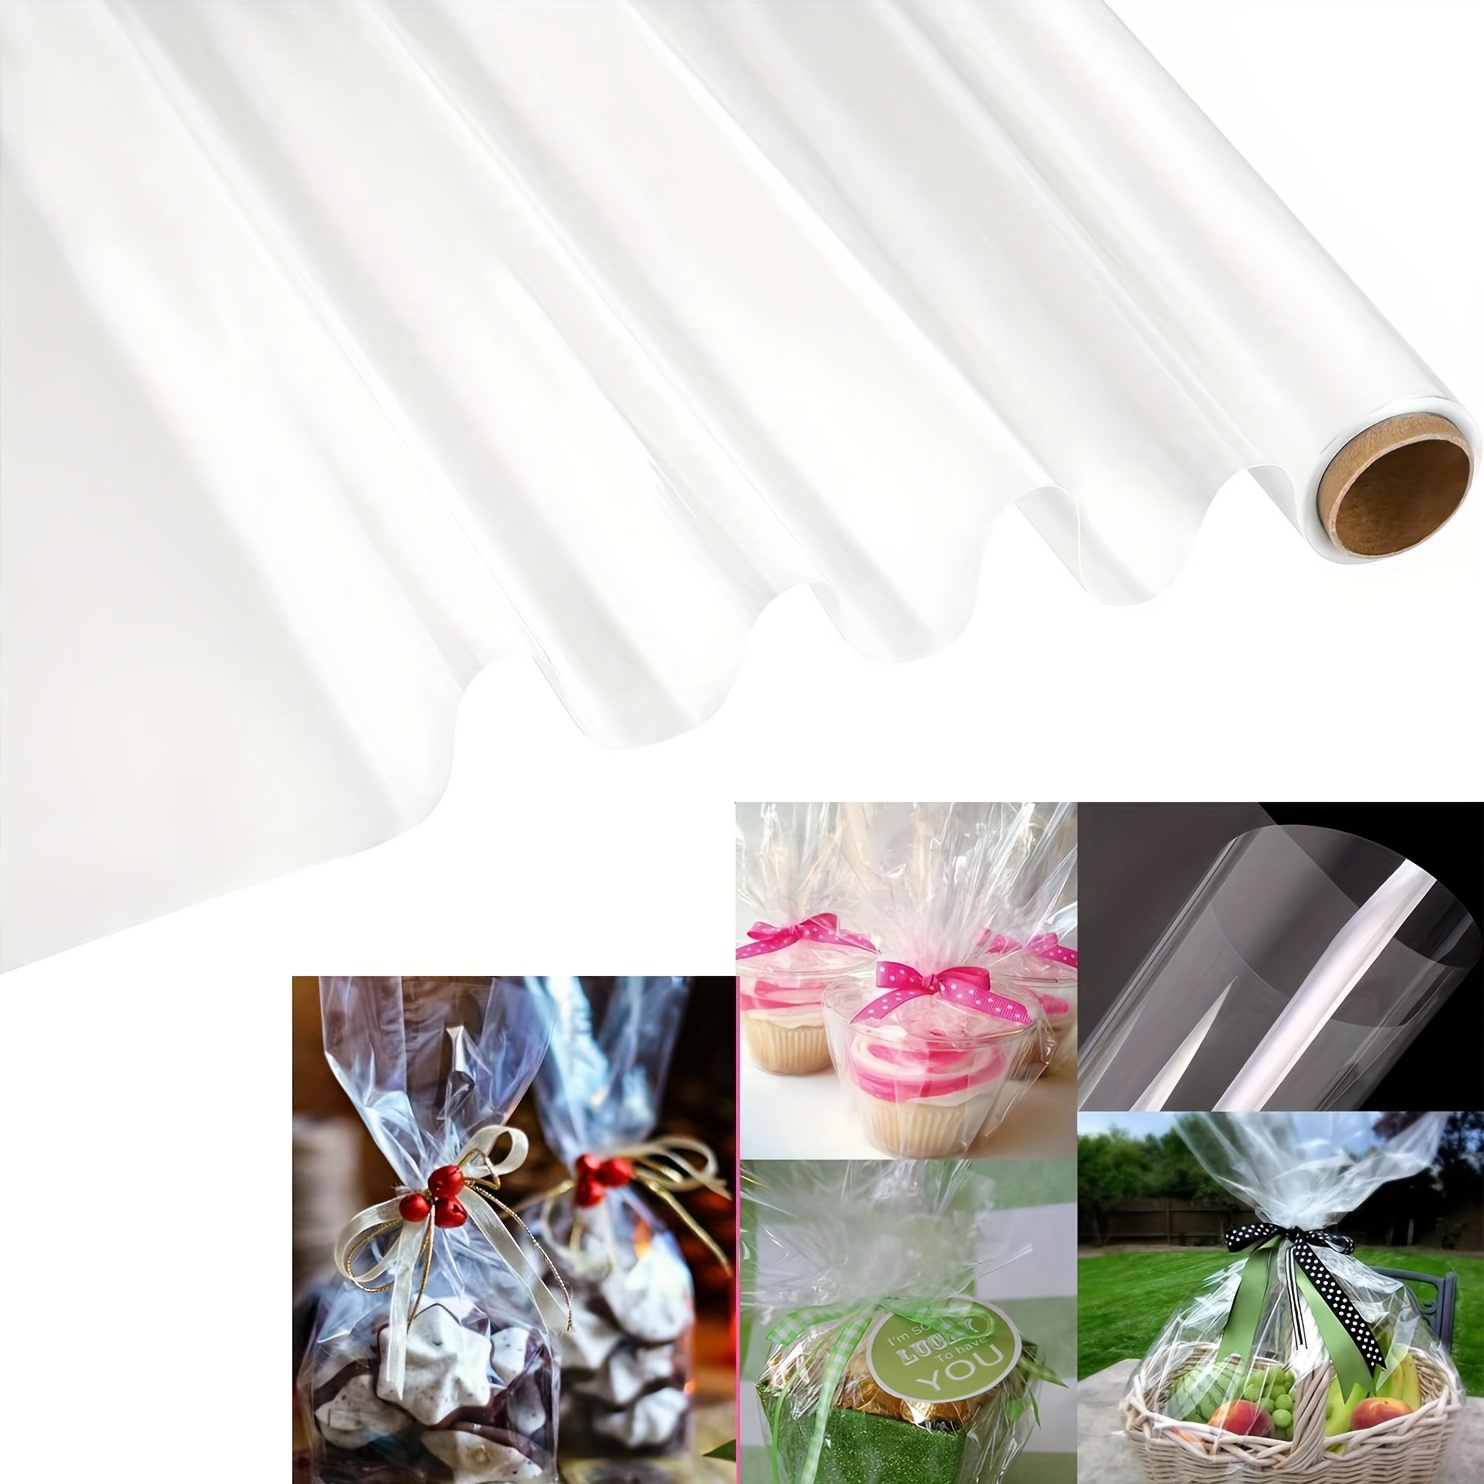 Cellophane & Korean Wrapping Paper - Page 1 - LO Florist Supplies